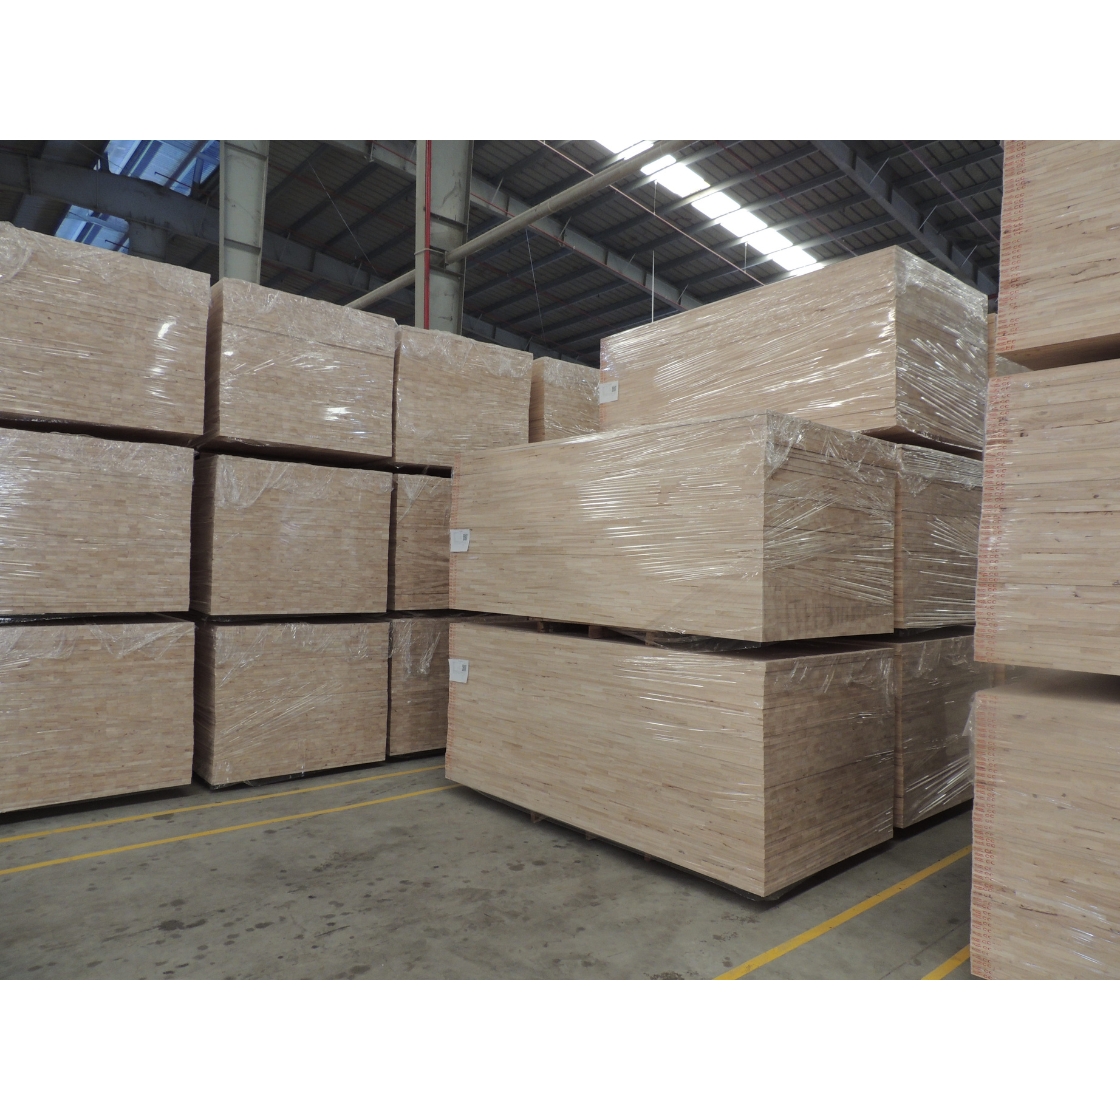 Rubber Wood Professional Team Rubber Wood Indoor Furniture Fsc-Coc Customized Packaging Made In Vietnam Manufacturer 1